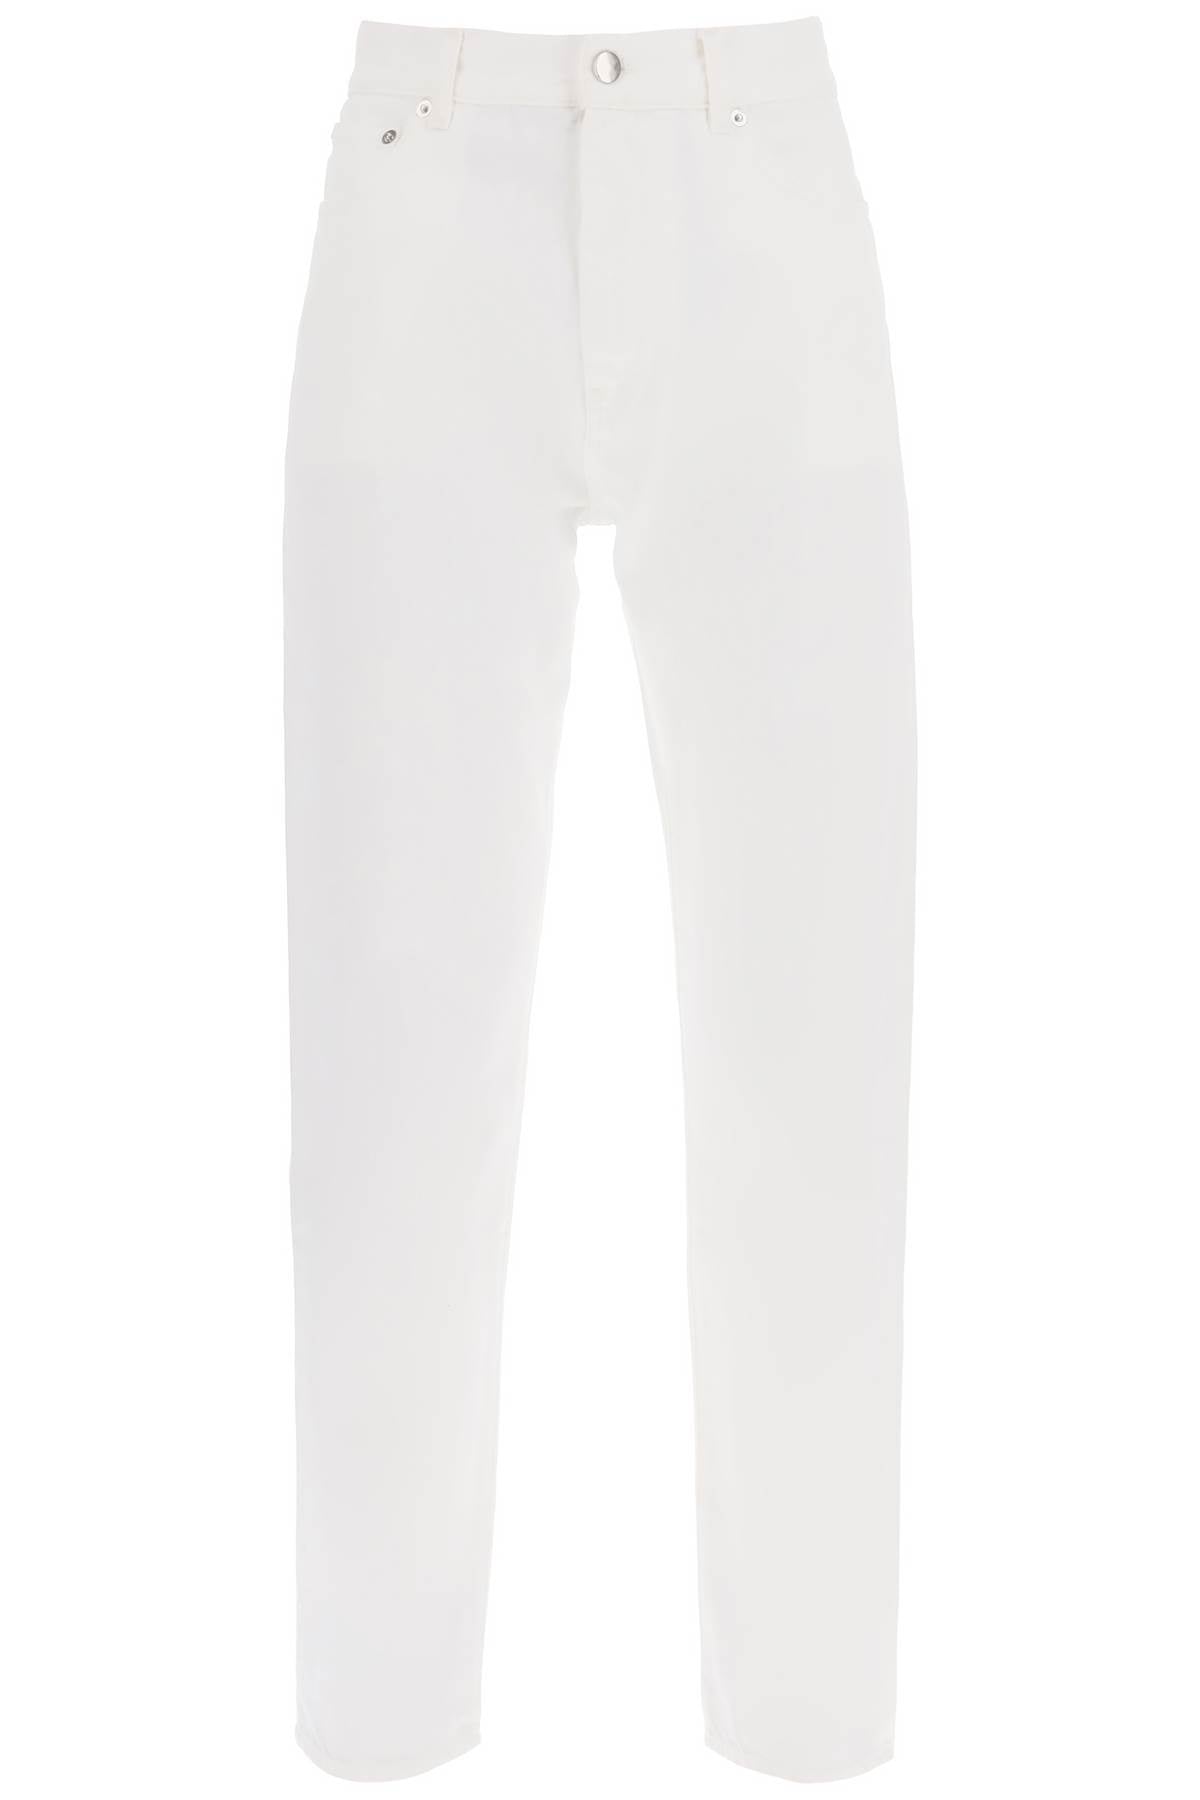 Loulou studio cropped straight cut jeans WULAR IVORY